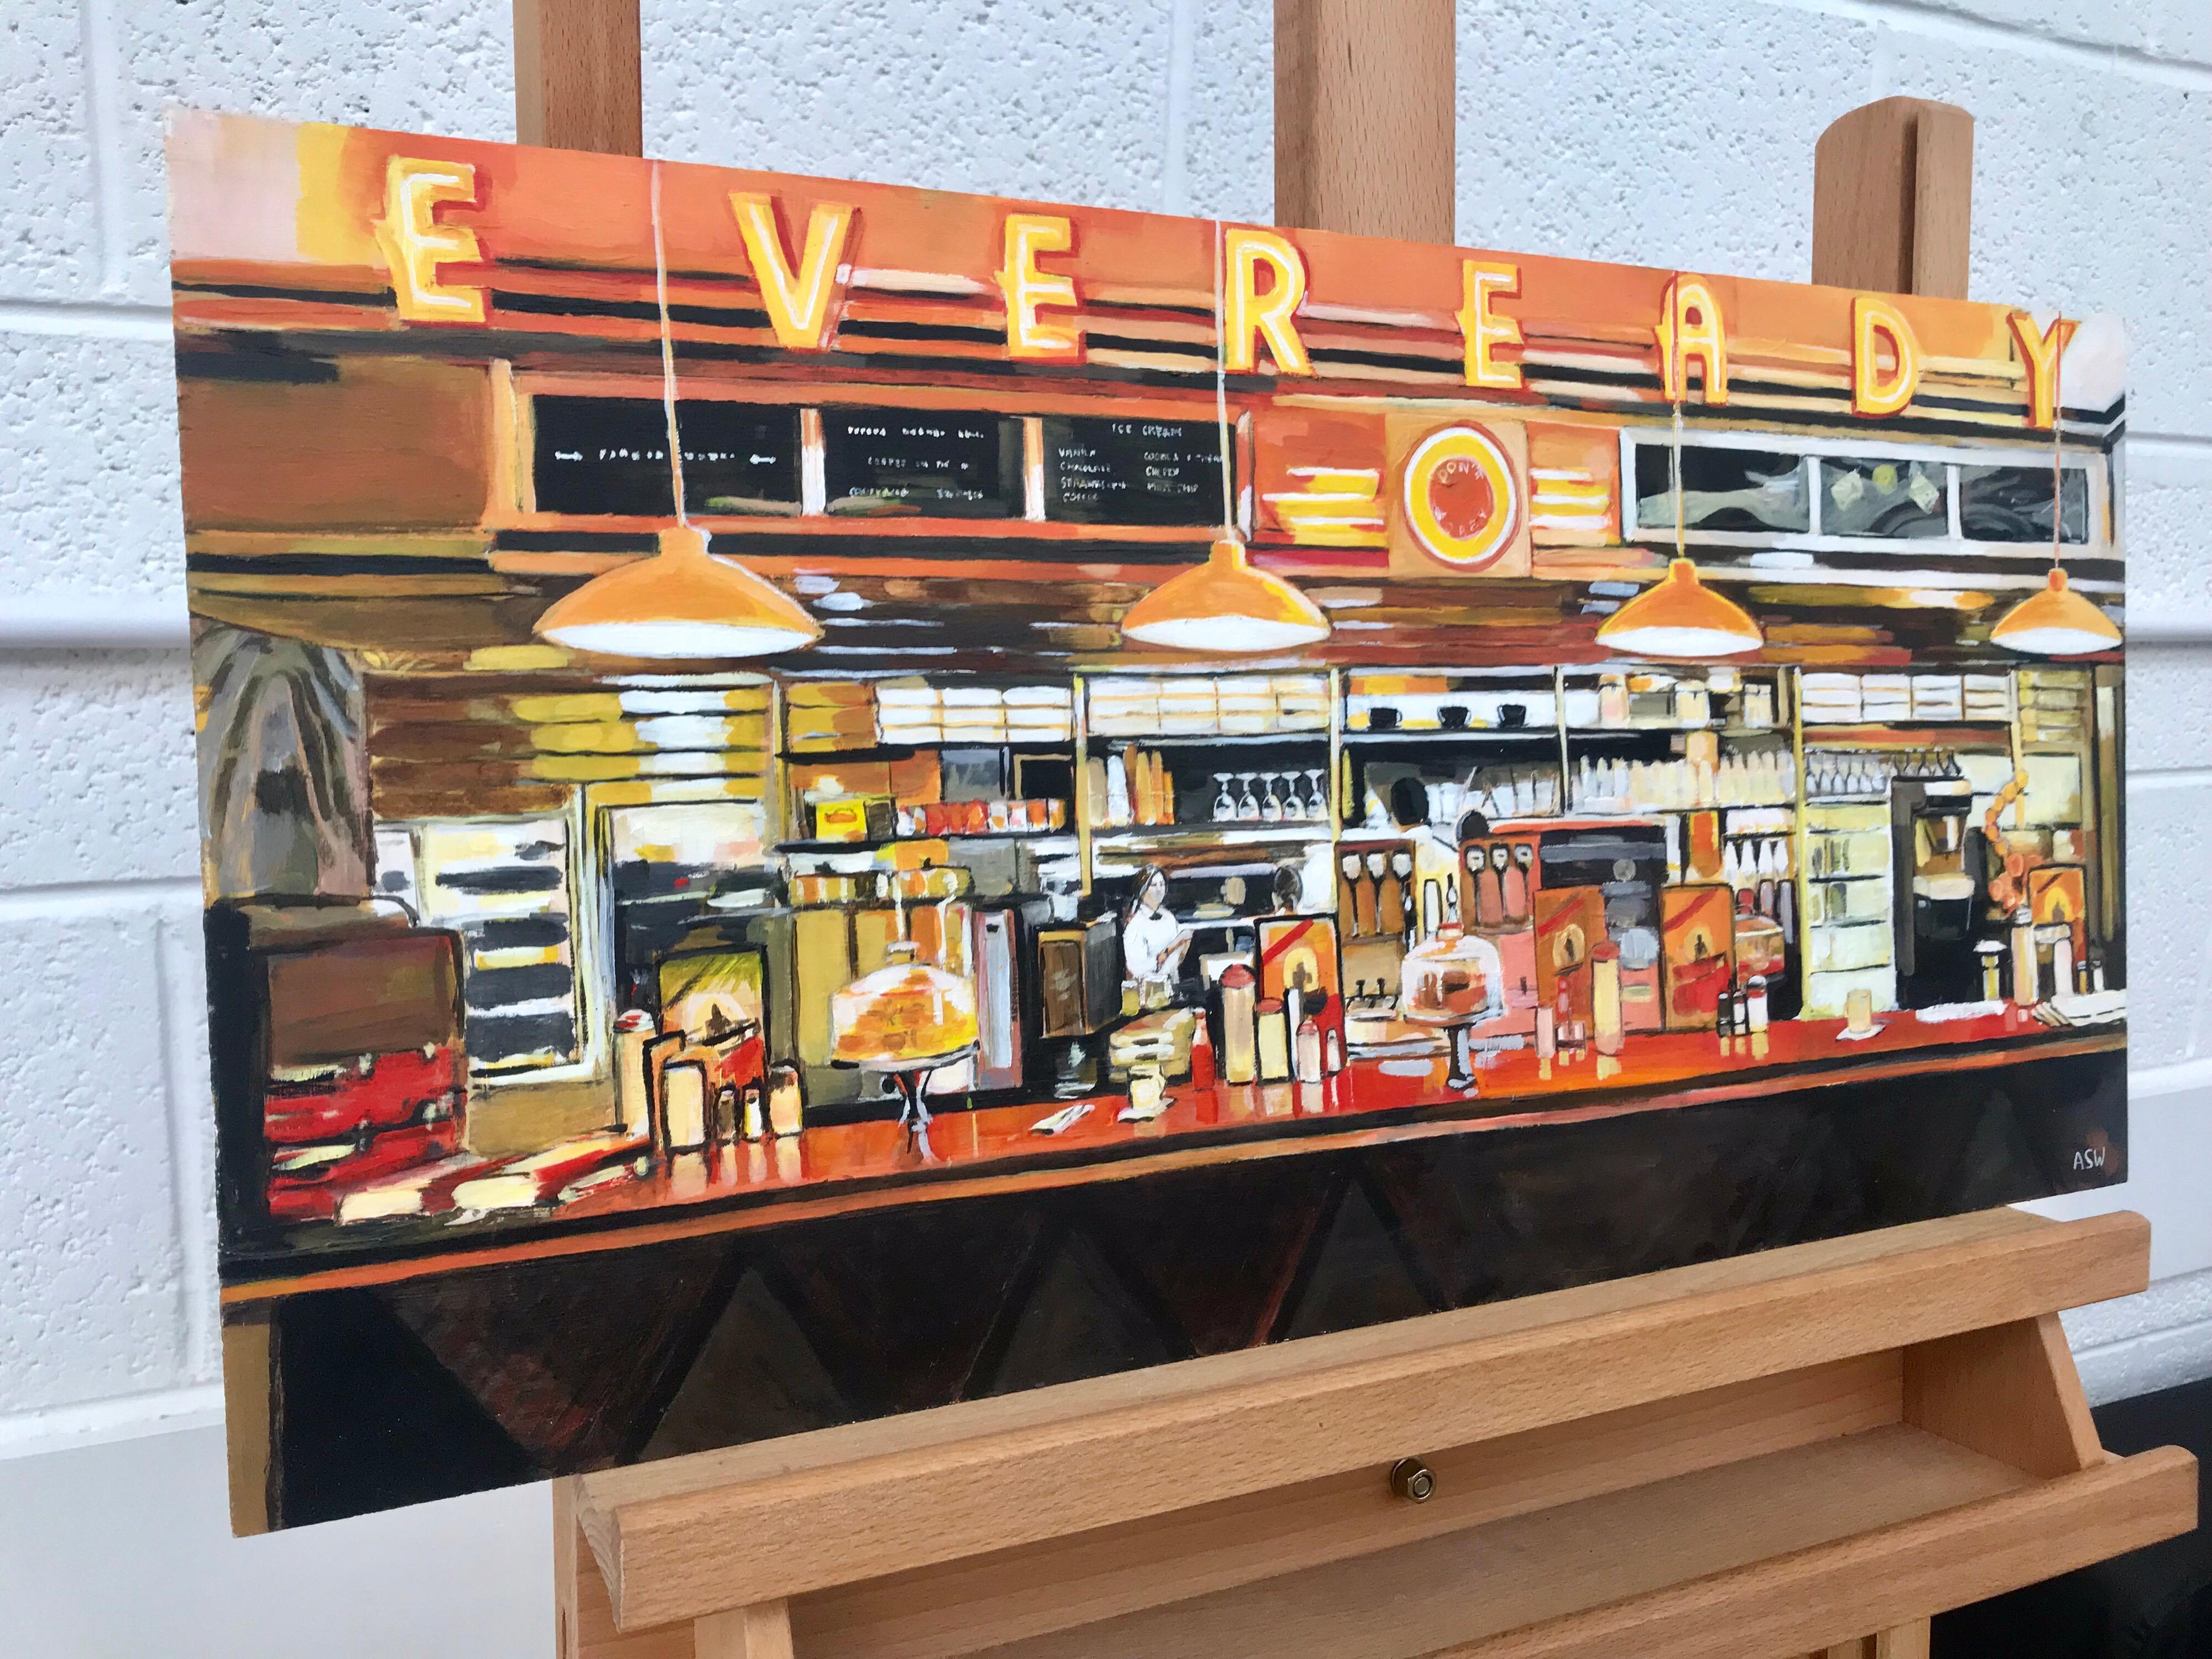 American Diner Still Life Painting by Leading British Urban Landscape Artist For Sale 5